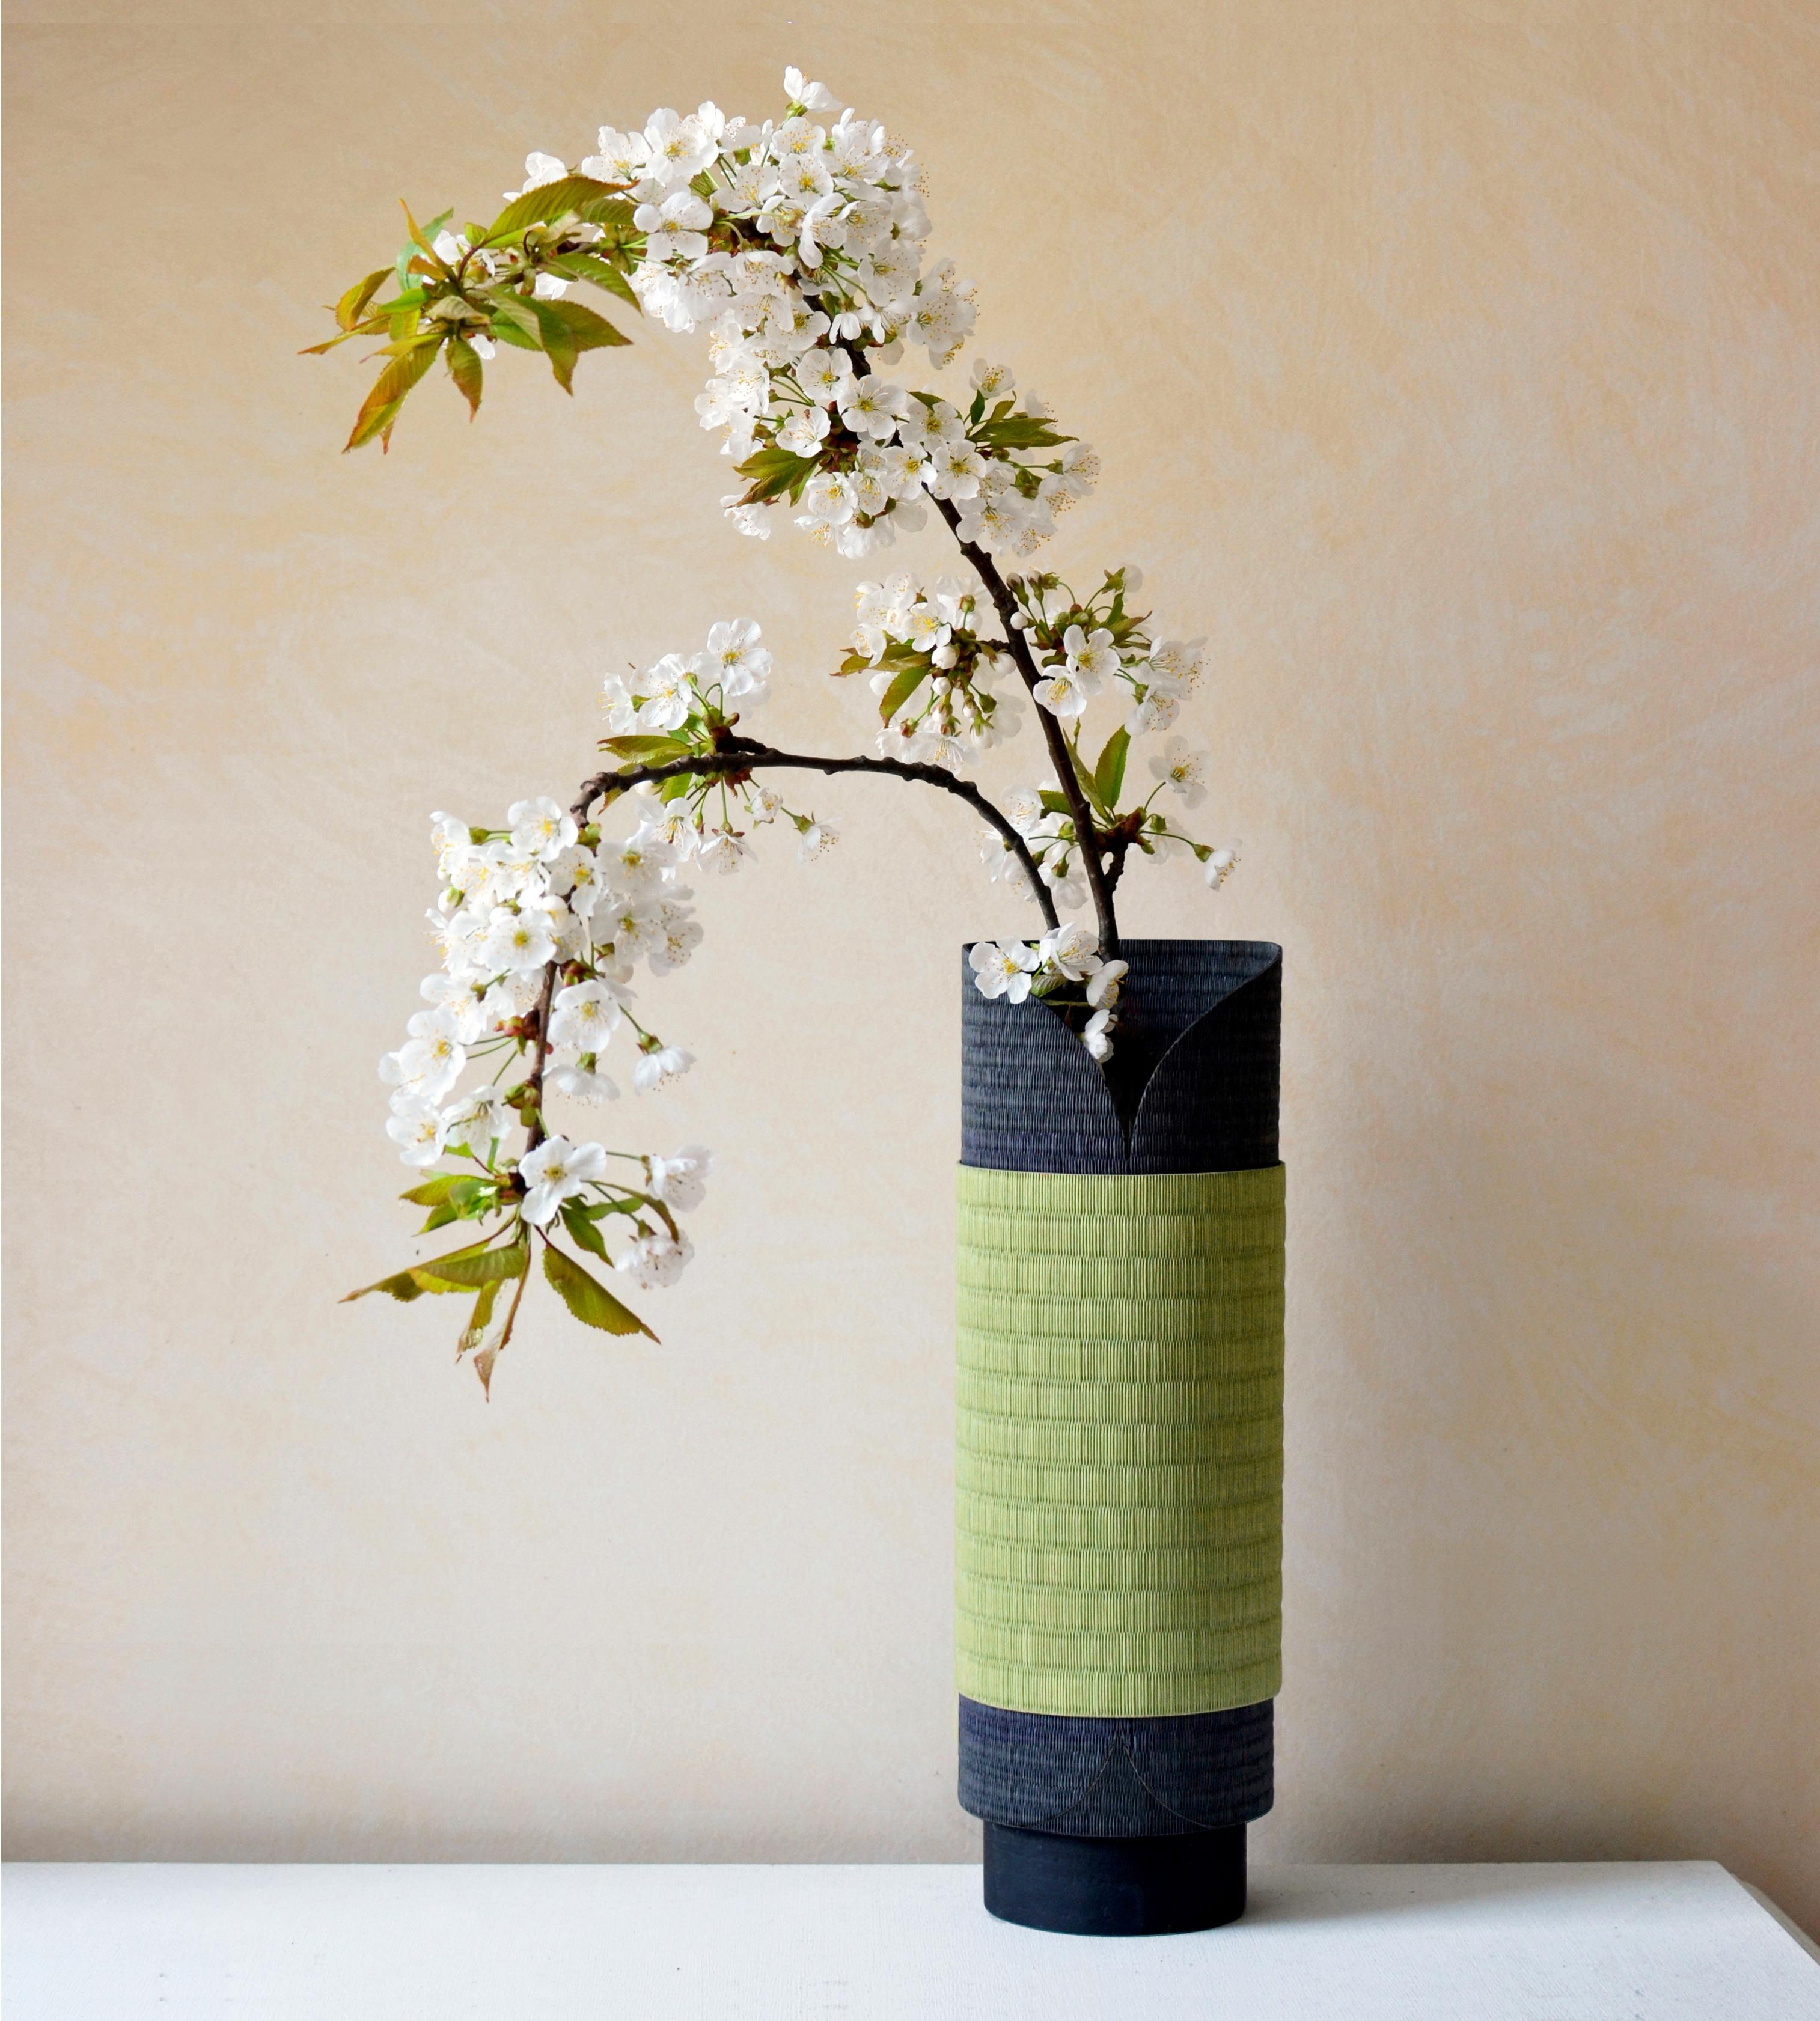 Yugen vase by Astrid Hauton
Dimensions: D 11.5 x H 35 cm
Materials: woven washi paper, waxed black Valchromat.

« Yugen », in Japanese, refers to an ideal of grace and subtlety. The Yugen vase has been designed to
embrace this mysterious sense